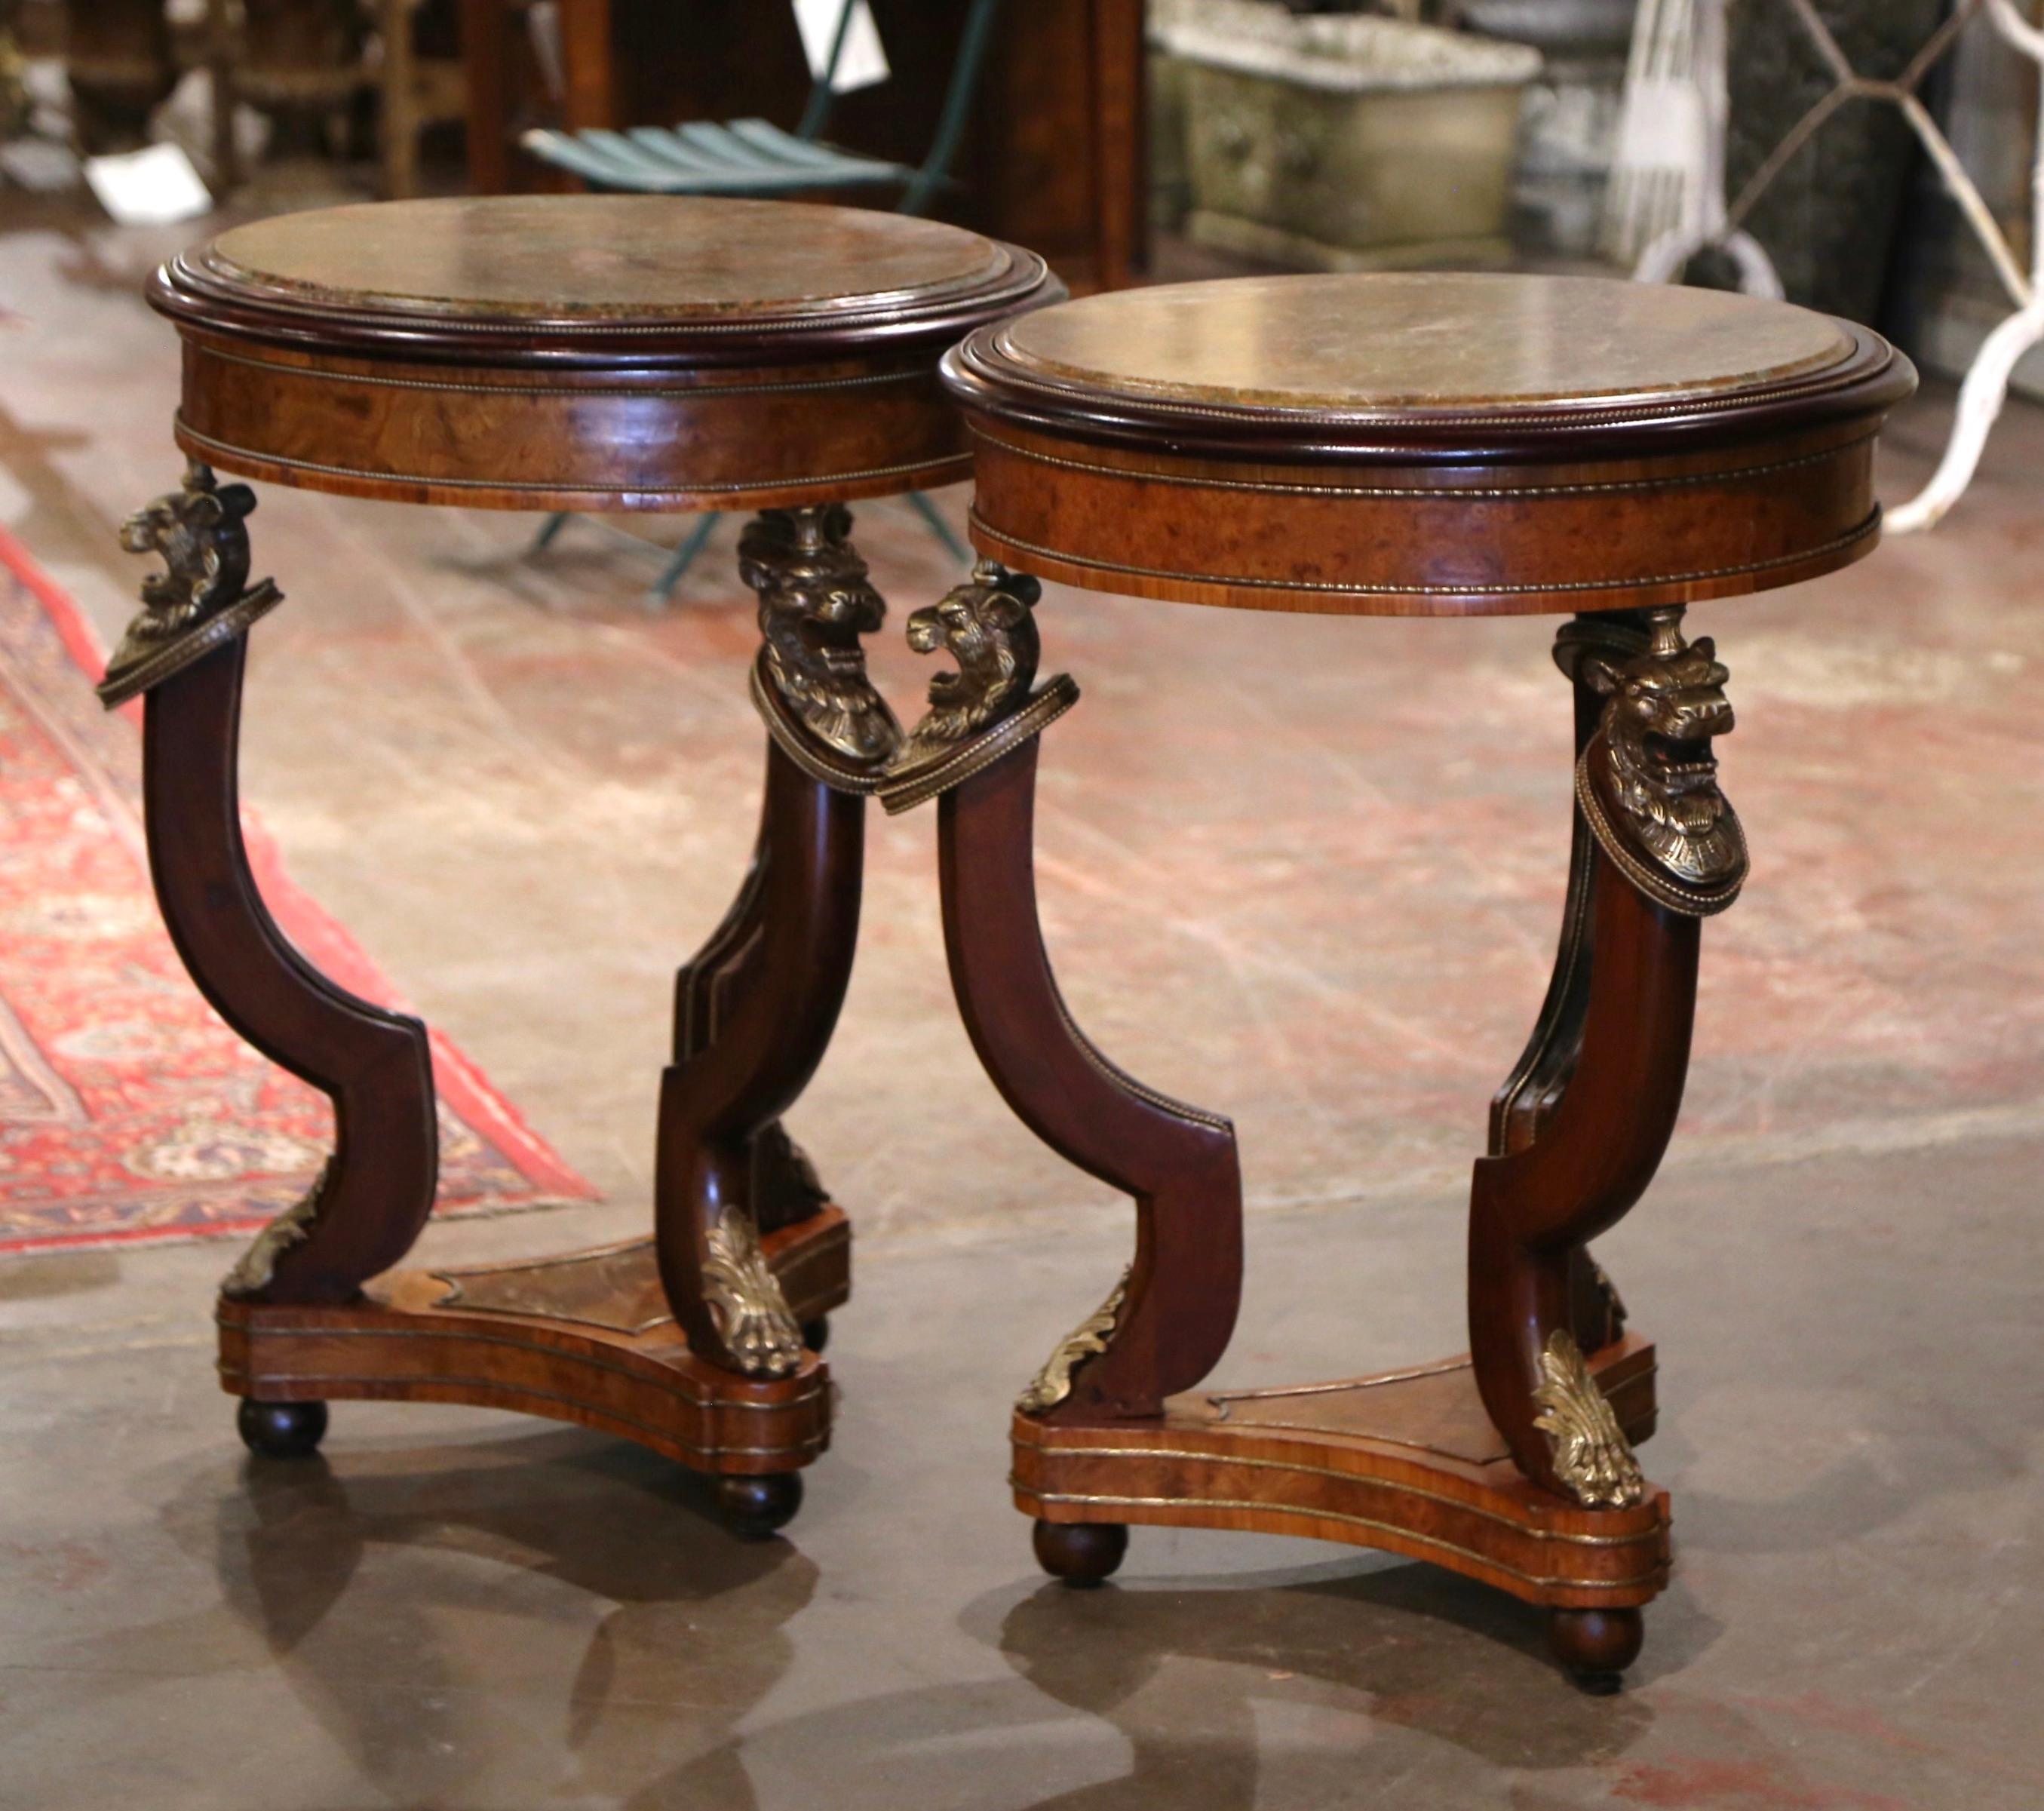 Pair of 19th Century French Marble Top Carved Burl Walnut Gueridon Tables In Excellent Condition For Sale In Dallas, TX